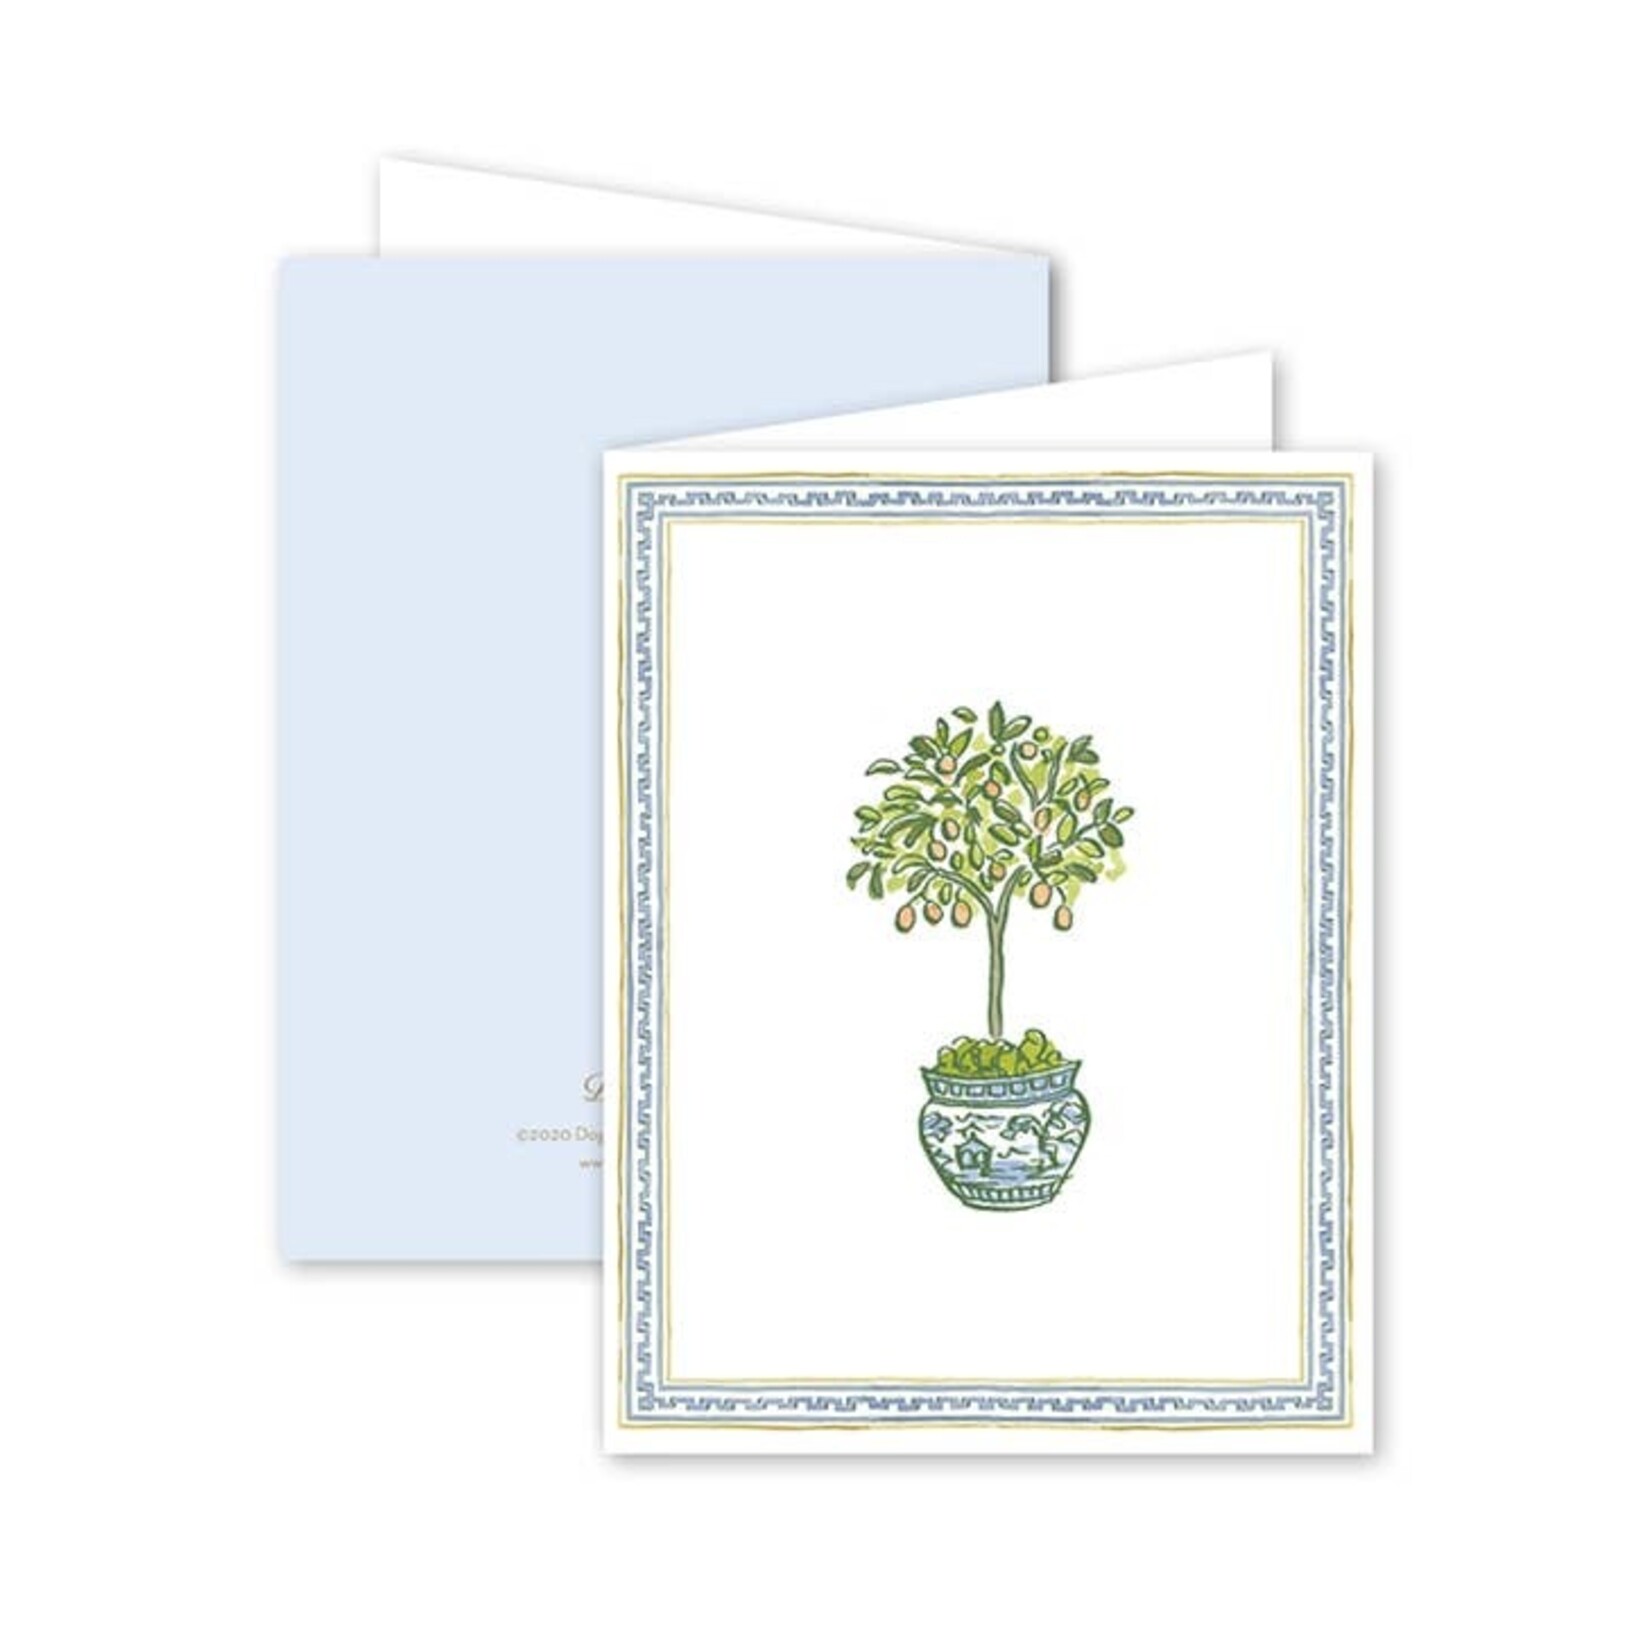 Topiary Trimmings Note Cards| Box of 8